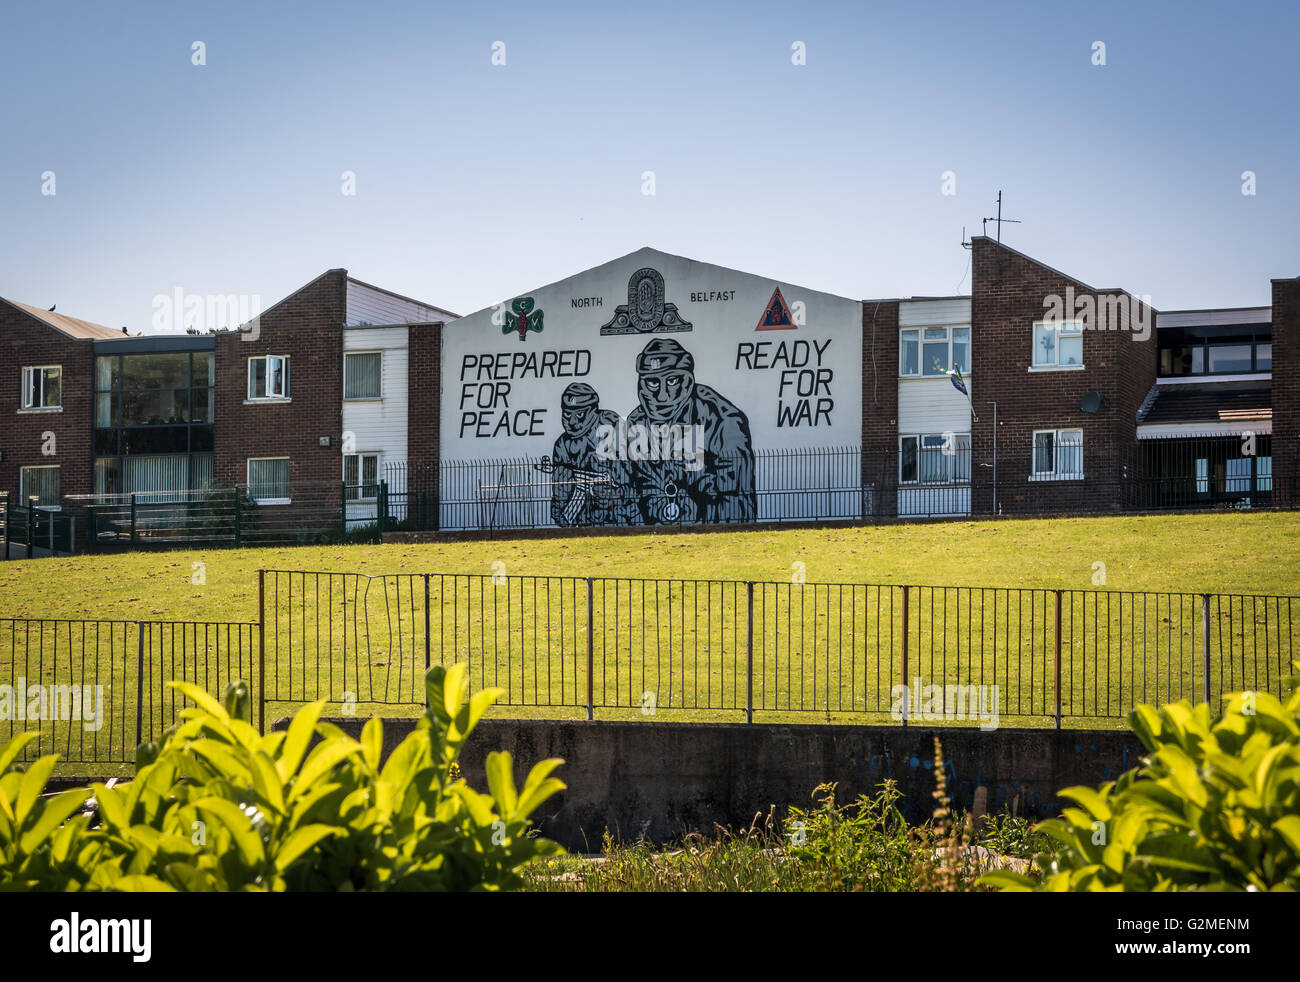 Prepared For Peace, Ready For War loyalist mural at entrance to Mount Vernon estate in North Belfast. Stock Photo